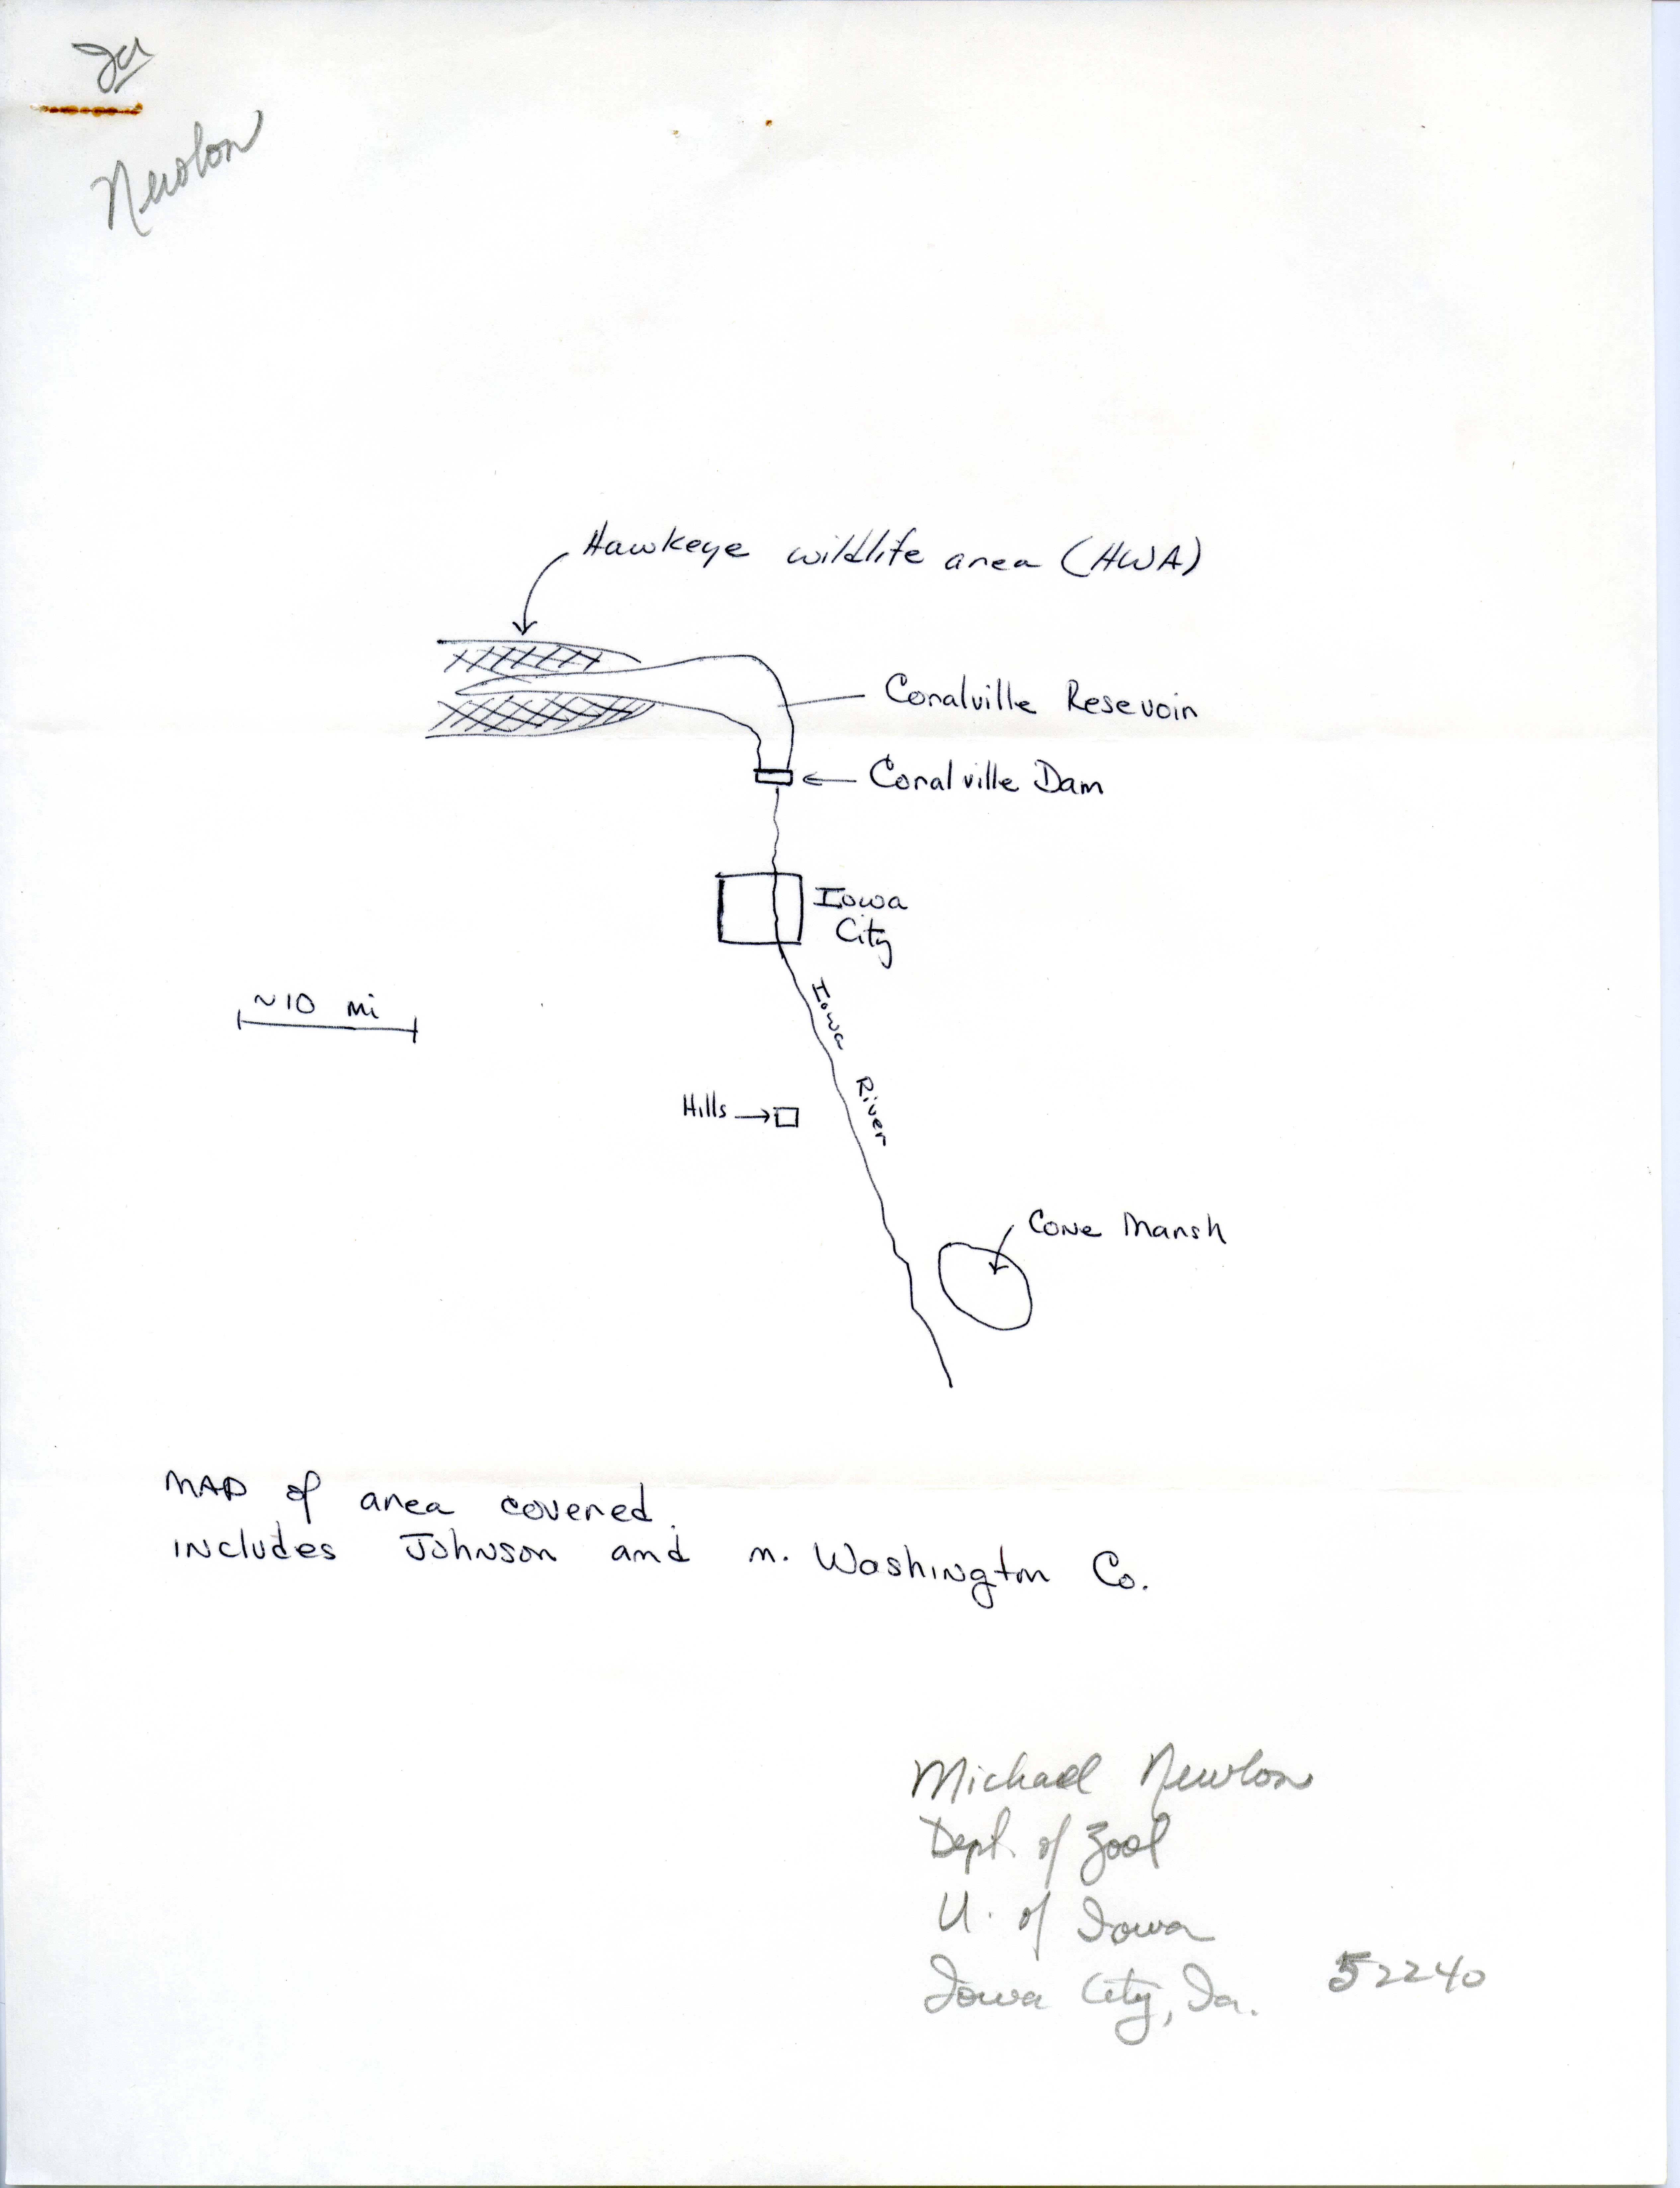 Field notes and map from Michael C. Newlon, Iowa City area, winter 1974-1975